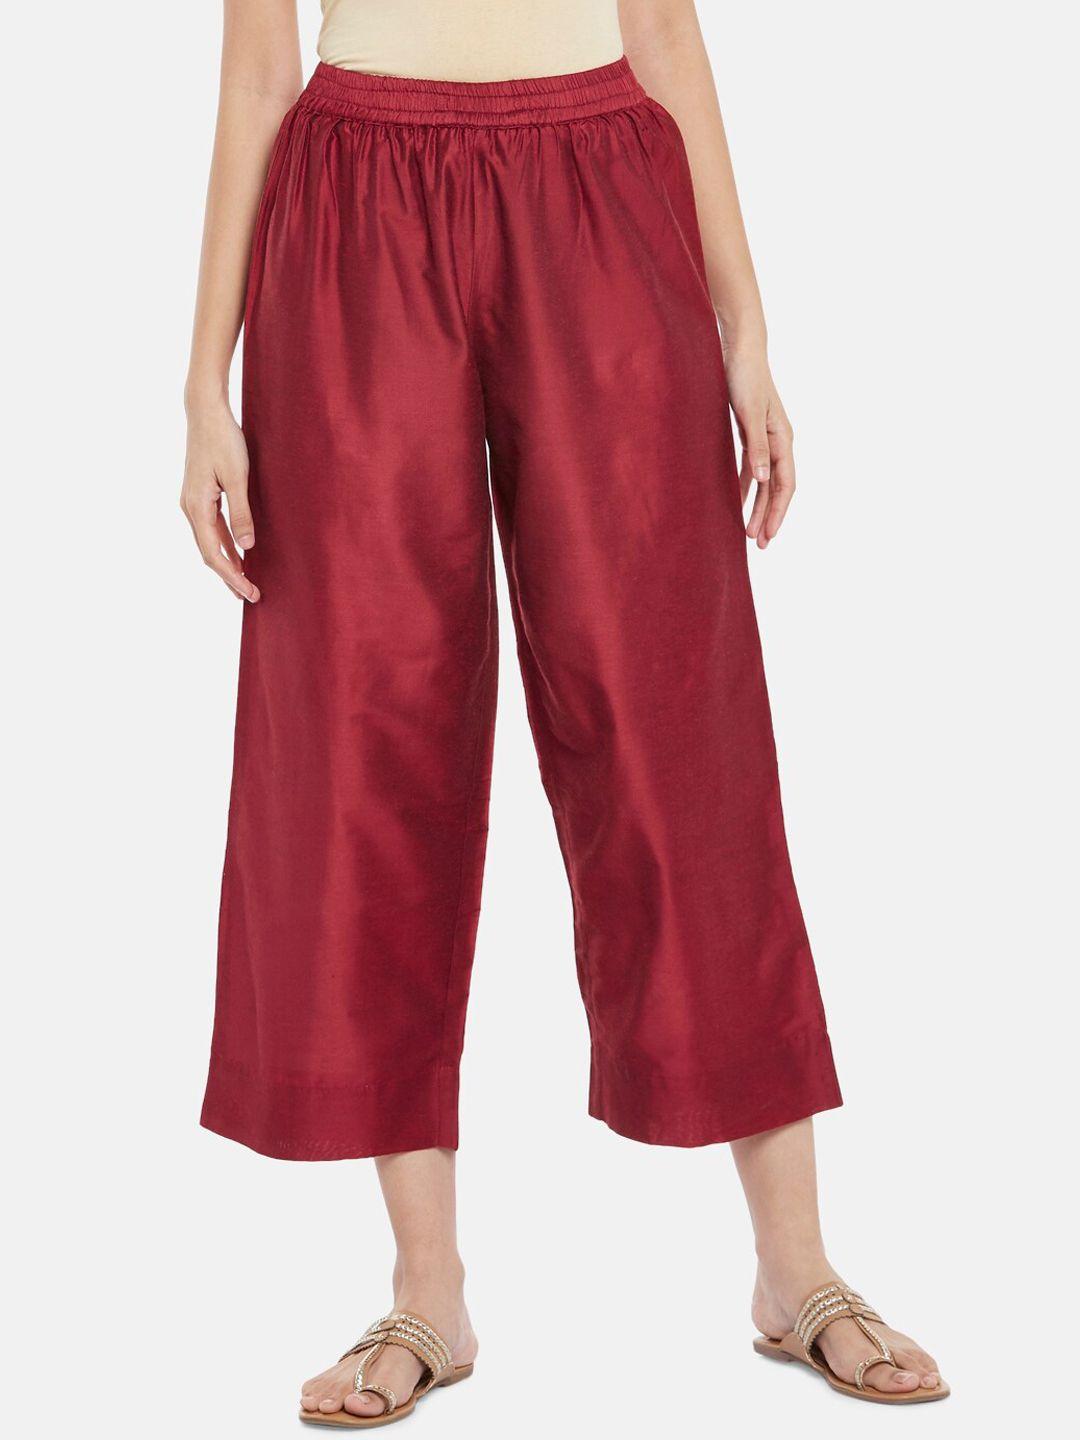 rangmanch by pantaloons women maroon solid culottes trouser